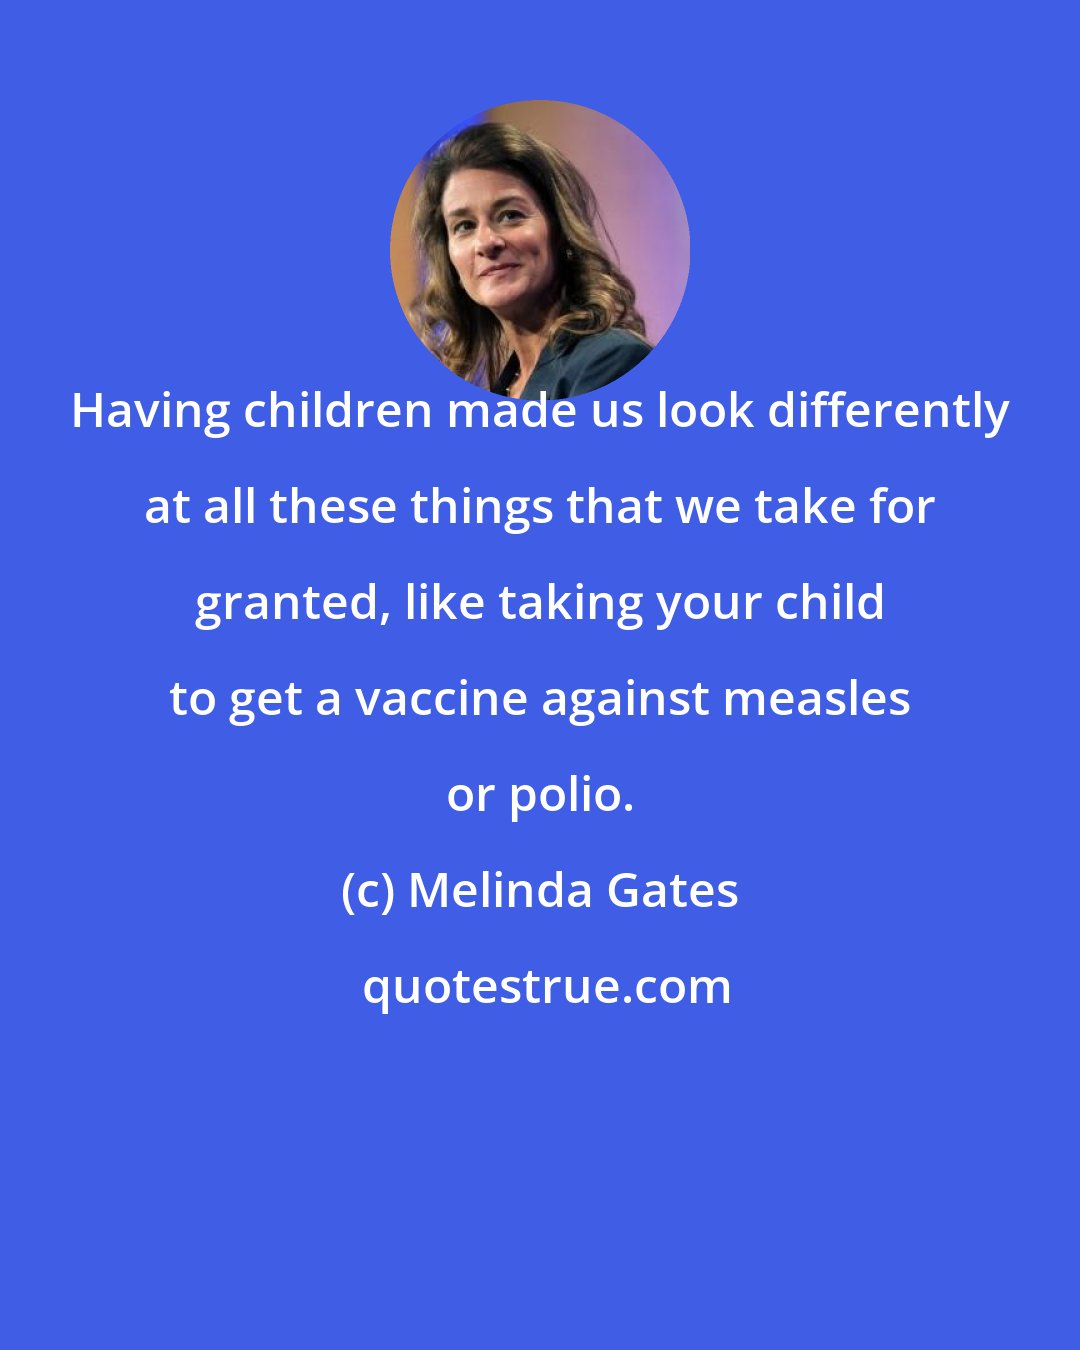 Melinda Gates: Having children made us look differently at all these things that we take for granted, like taking your child to get a vaccine against measles or polio.